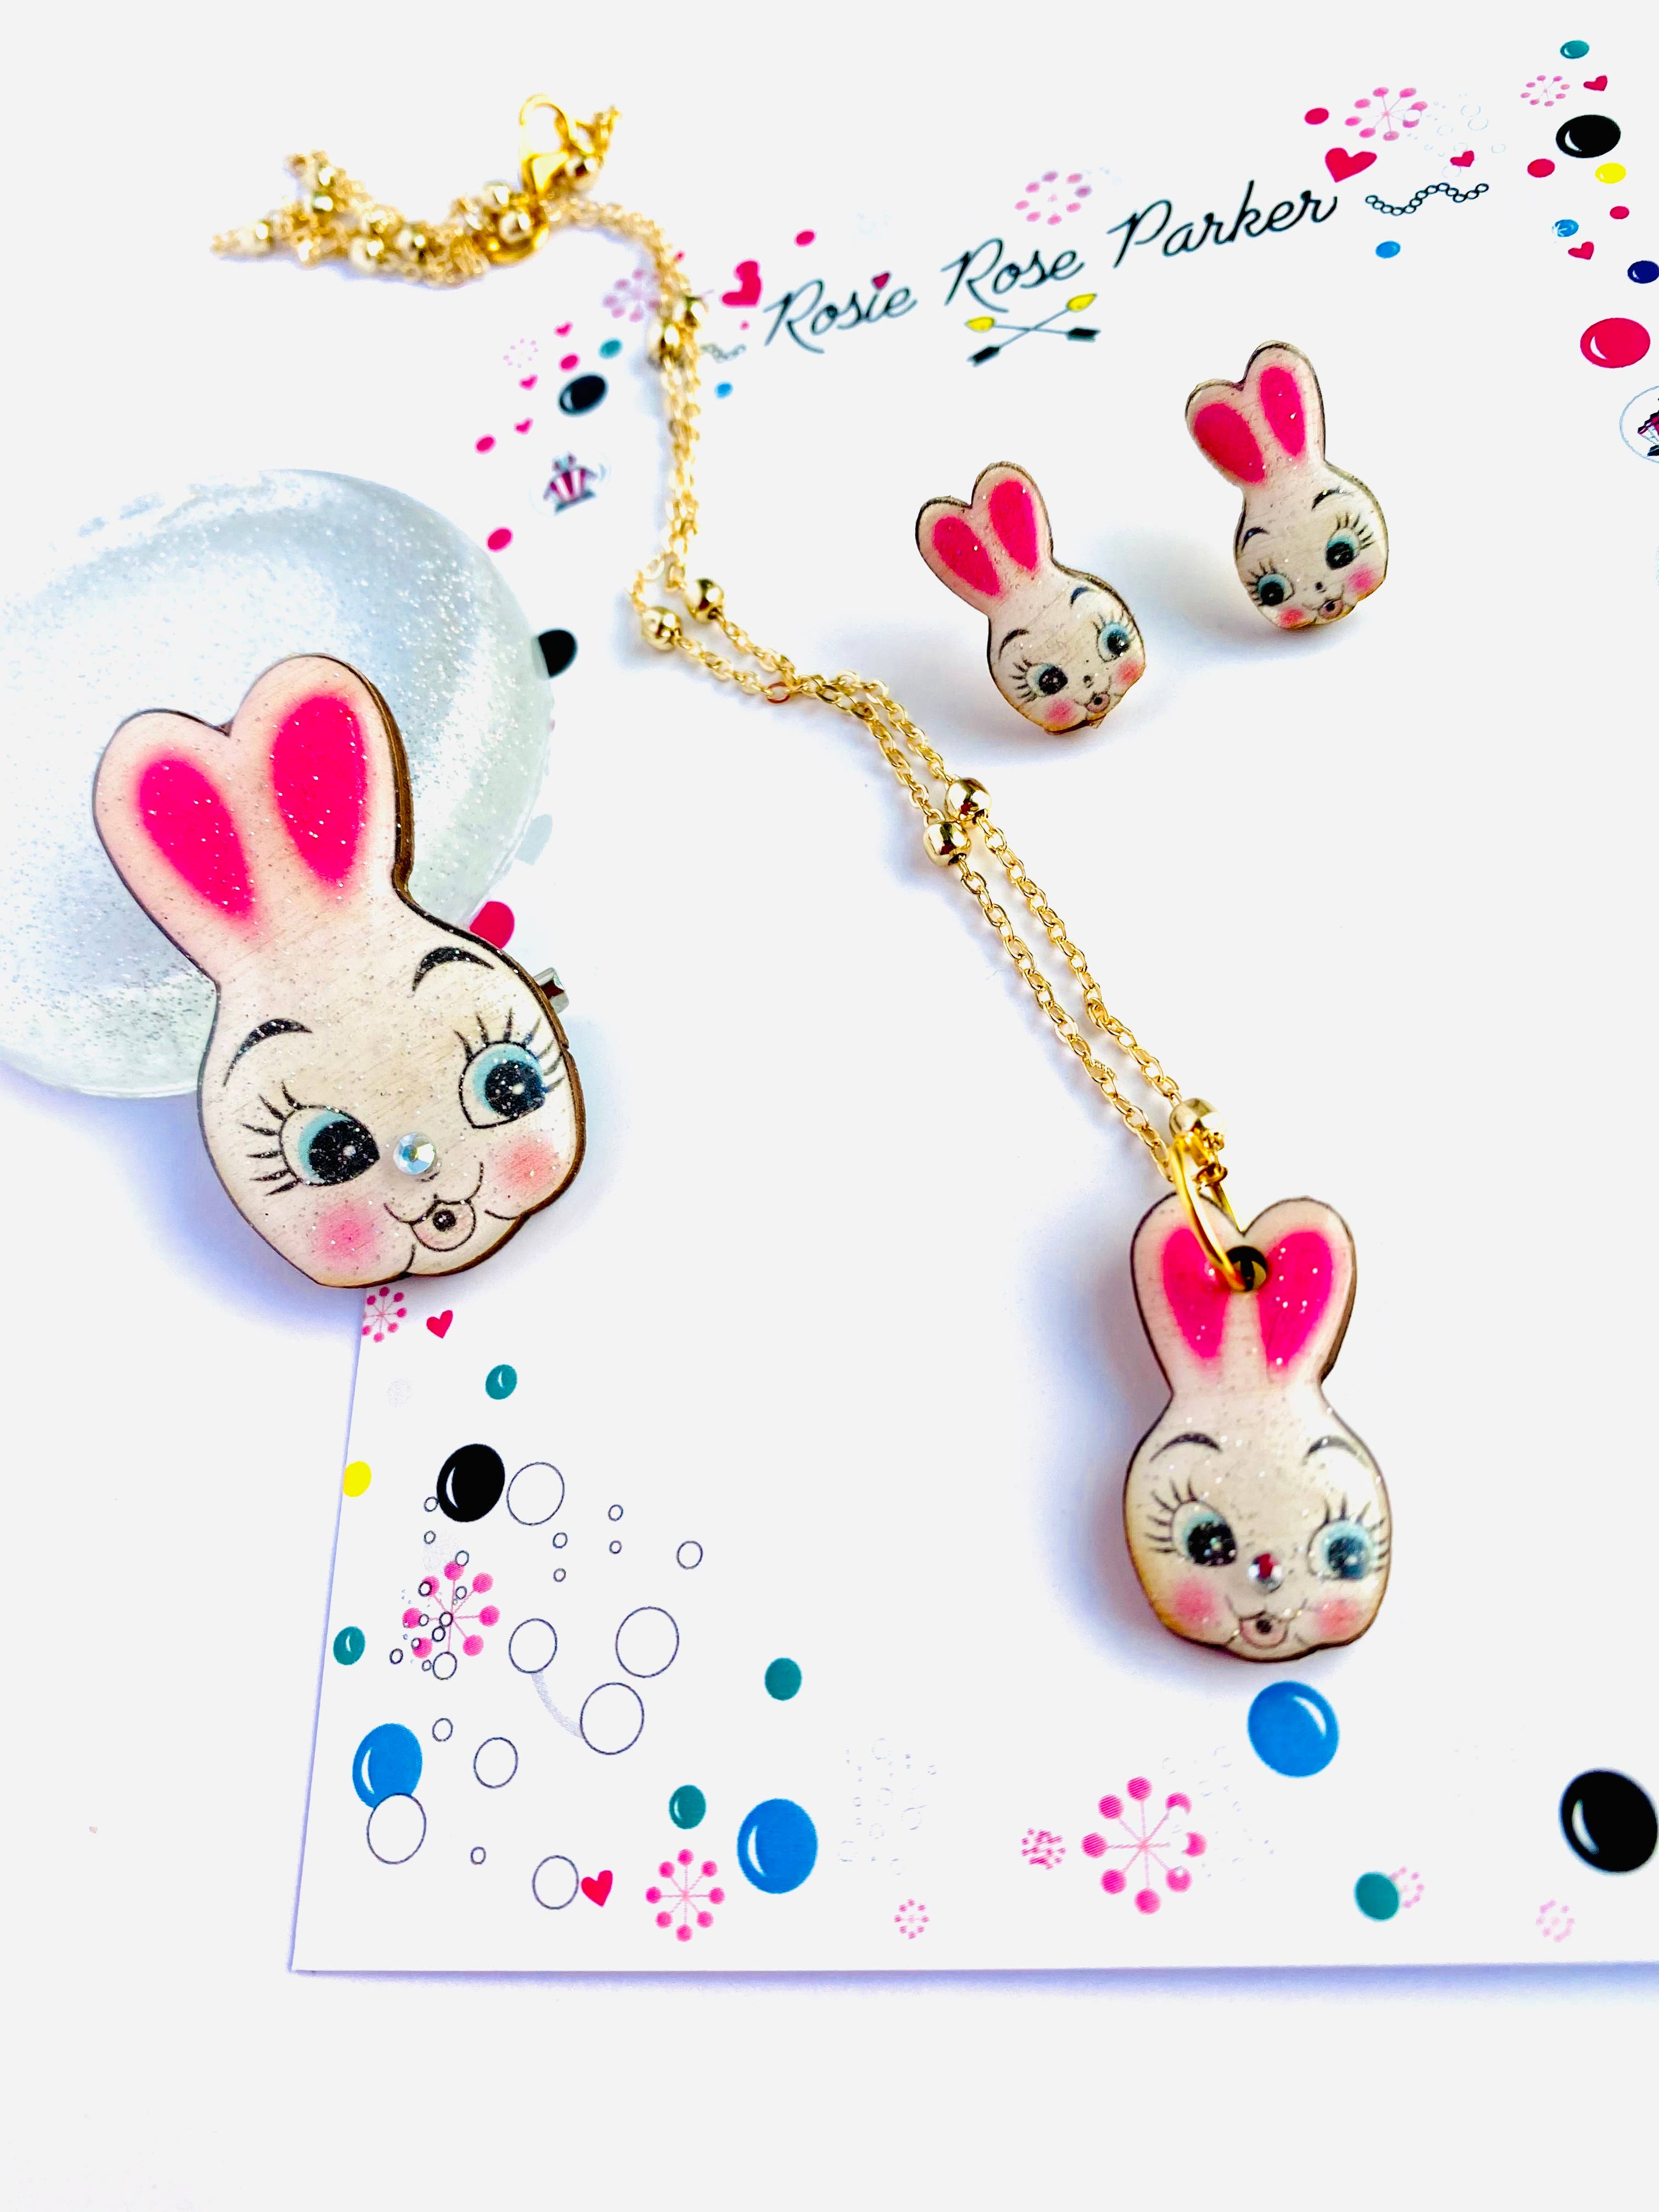 Retro spring easter bunny statement charm necklace by Rosie Rose Parker